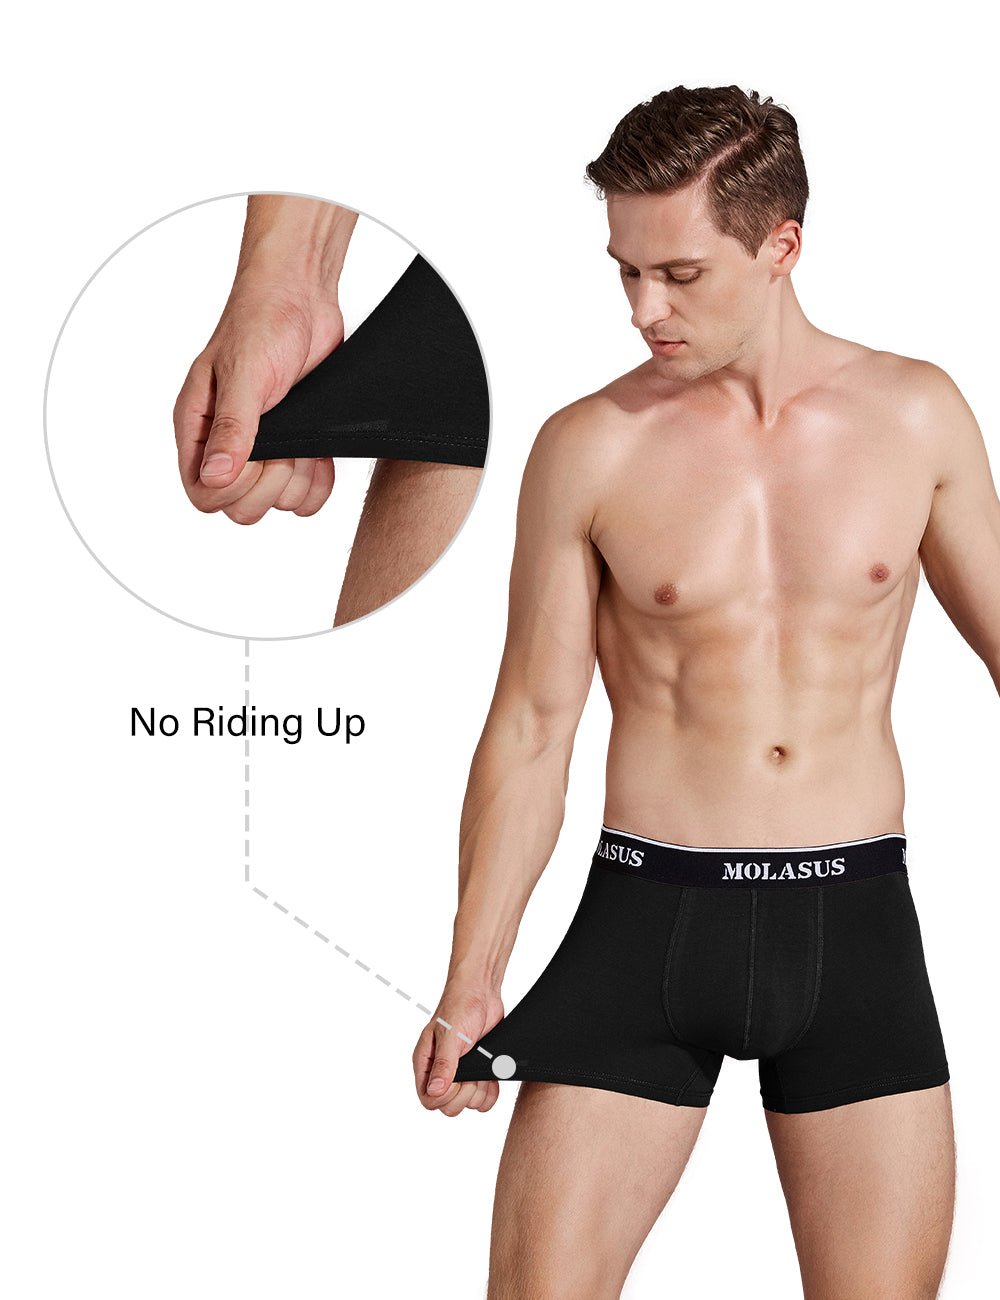 Molasus Mens Cotton Stretch Trunks Underwear No Fly Tagless Underpants